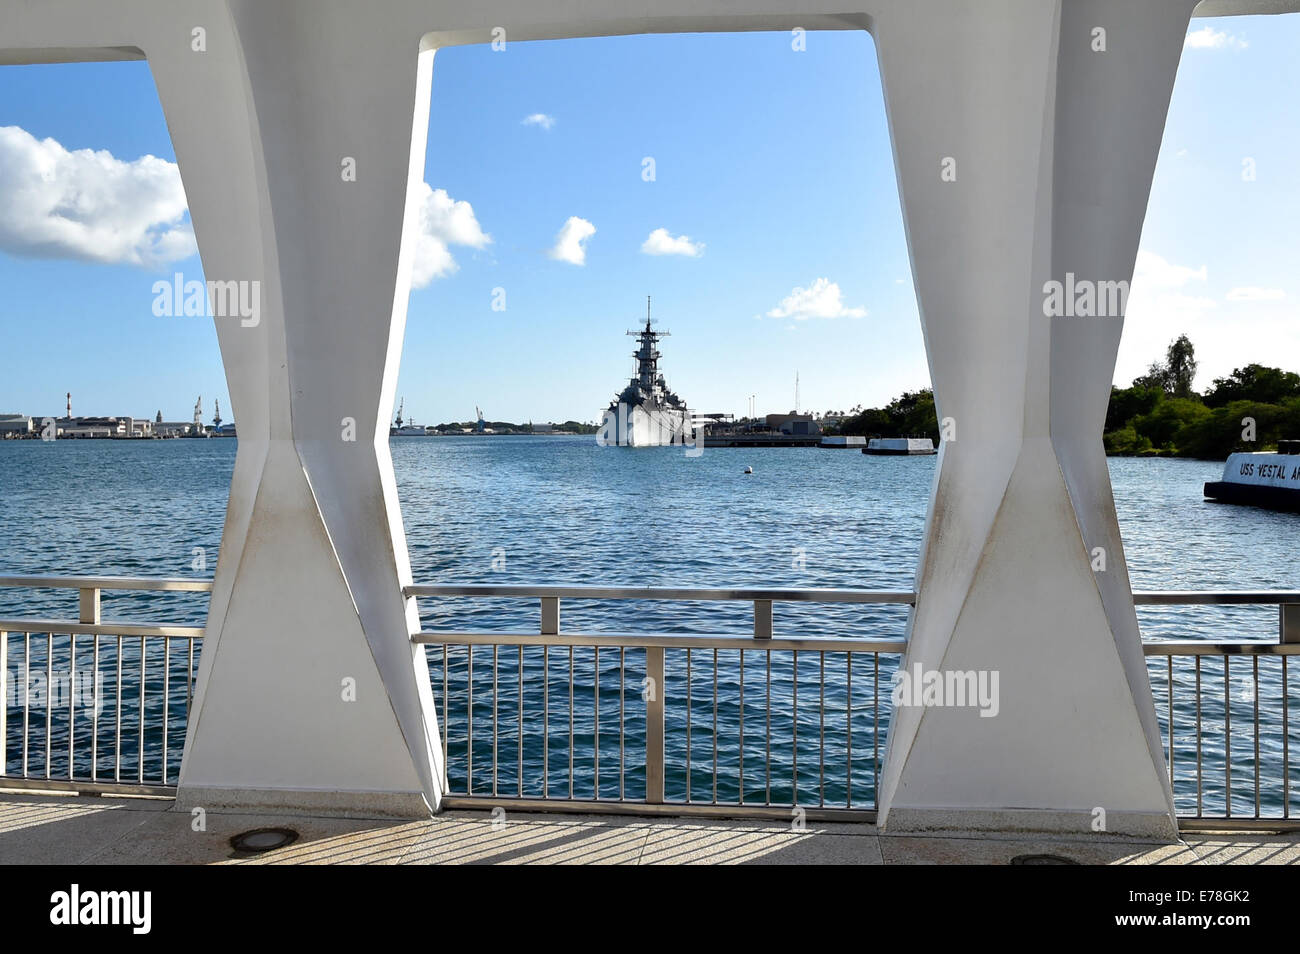 USS Missouri, As Seen From USS Arizona Memorial in Pearl Harbor The USS Missouri, on which the armistice ending World War II was Stock Photo